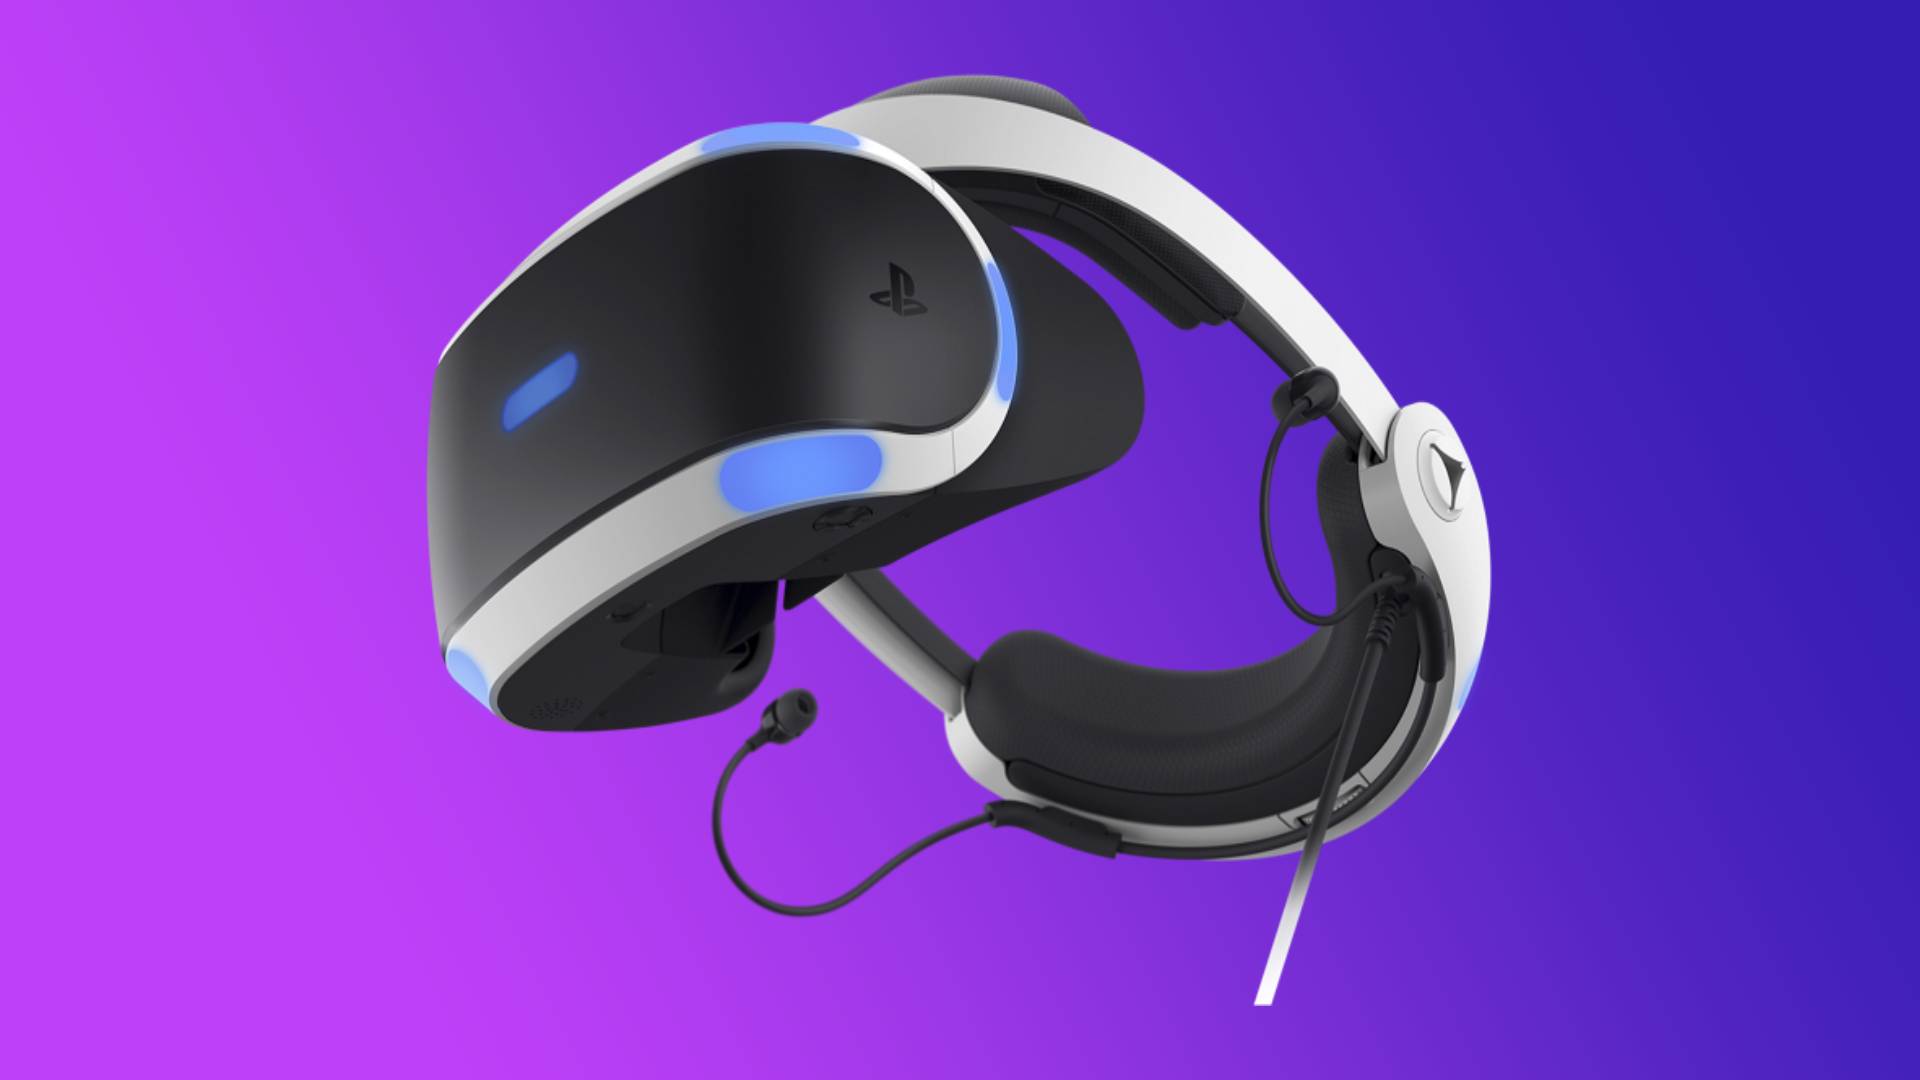 Zoom ind plyndringer Overfrakke How to use PlayStation VR on your gaming PC | PCGamesN